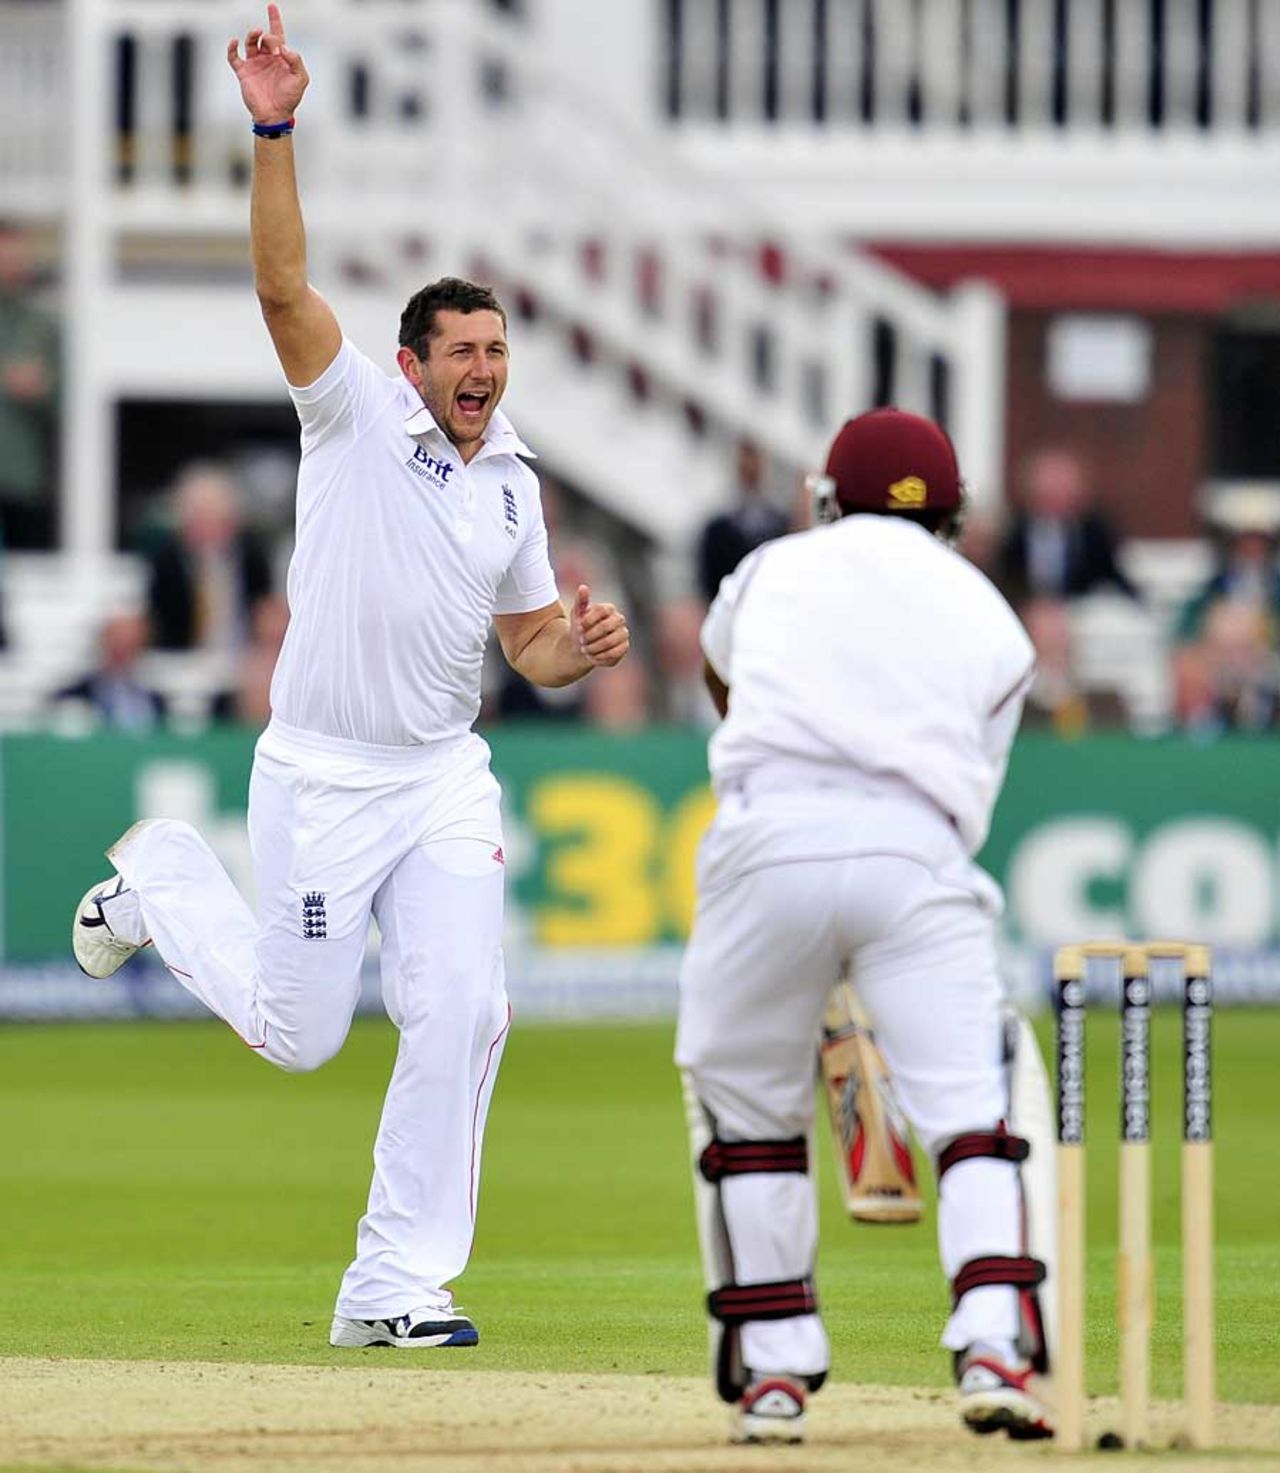 Tim Bresnan provided England with their first wicket, England v West Indies, 1st Test, Lord's, 3rd day, May 19, 2012